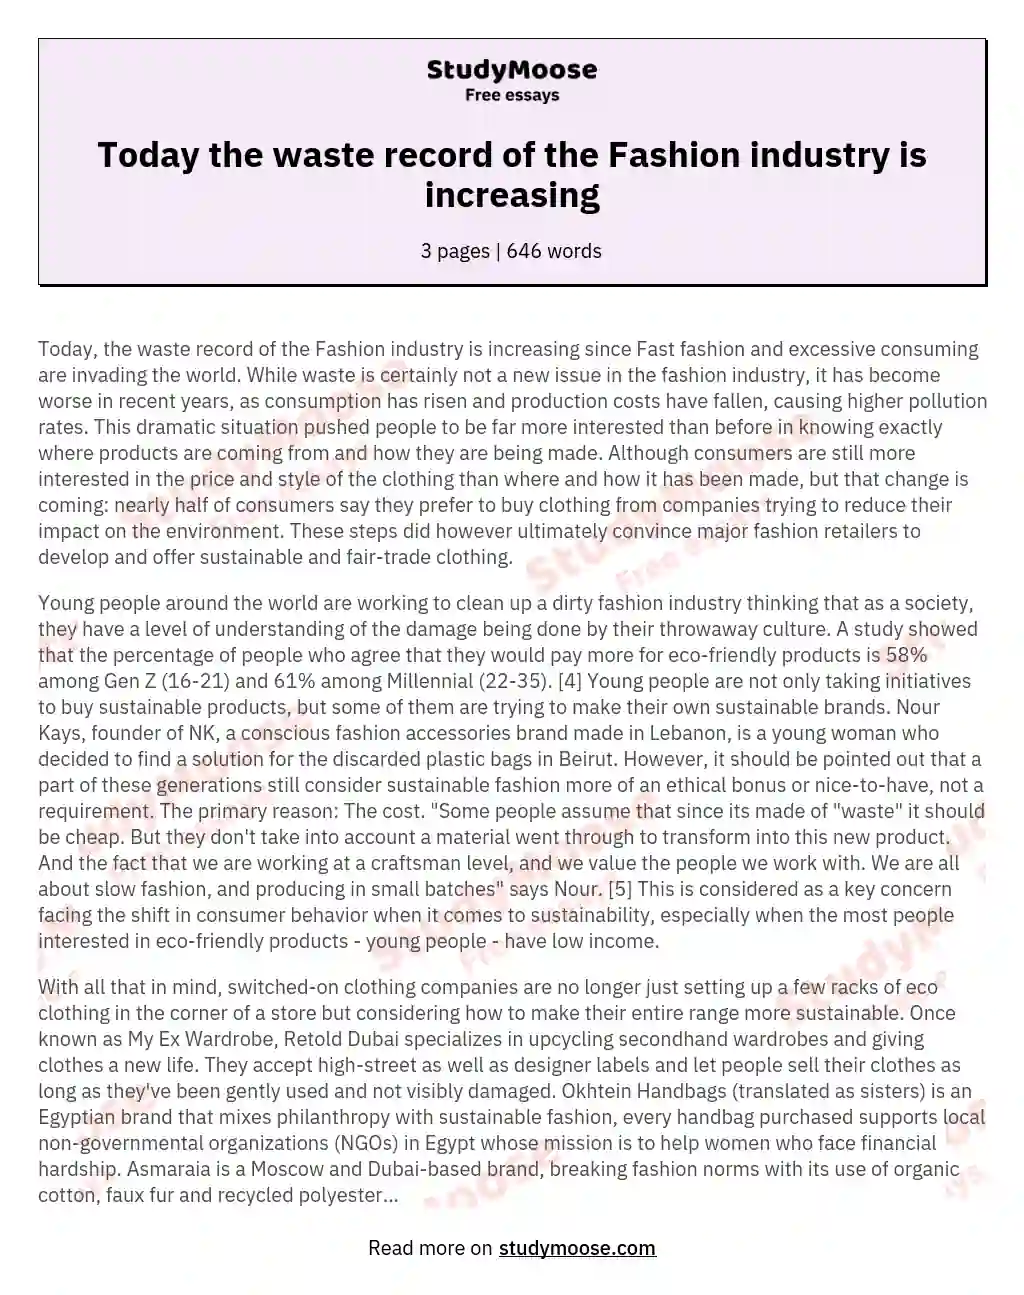 Today the waste record of the Fashion industry is increasing essay